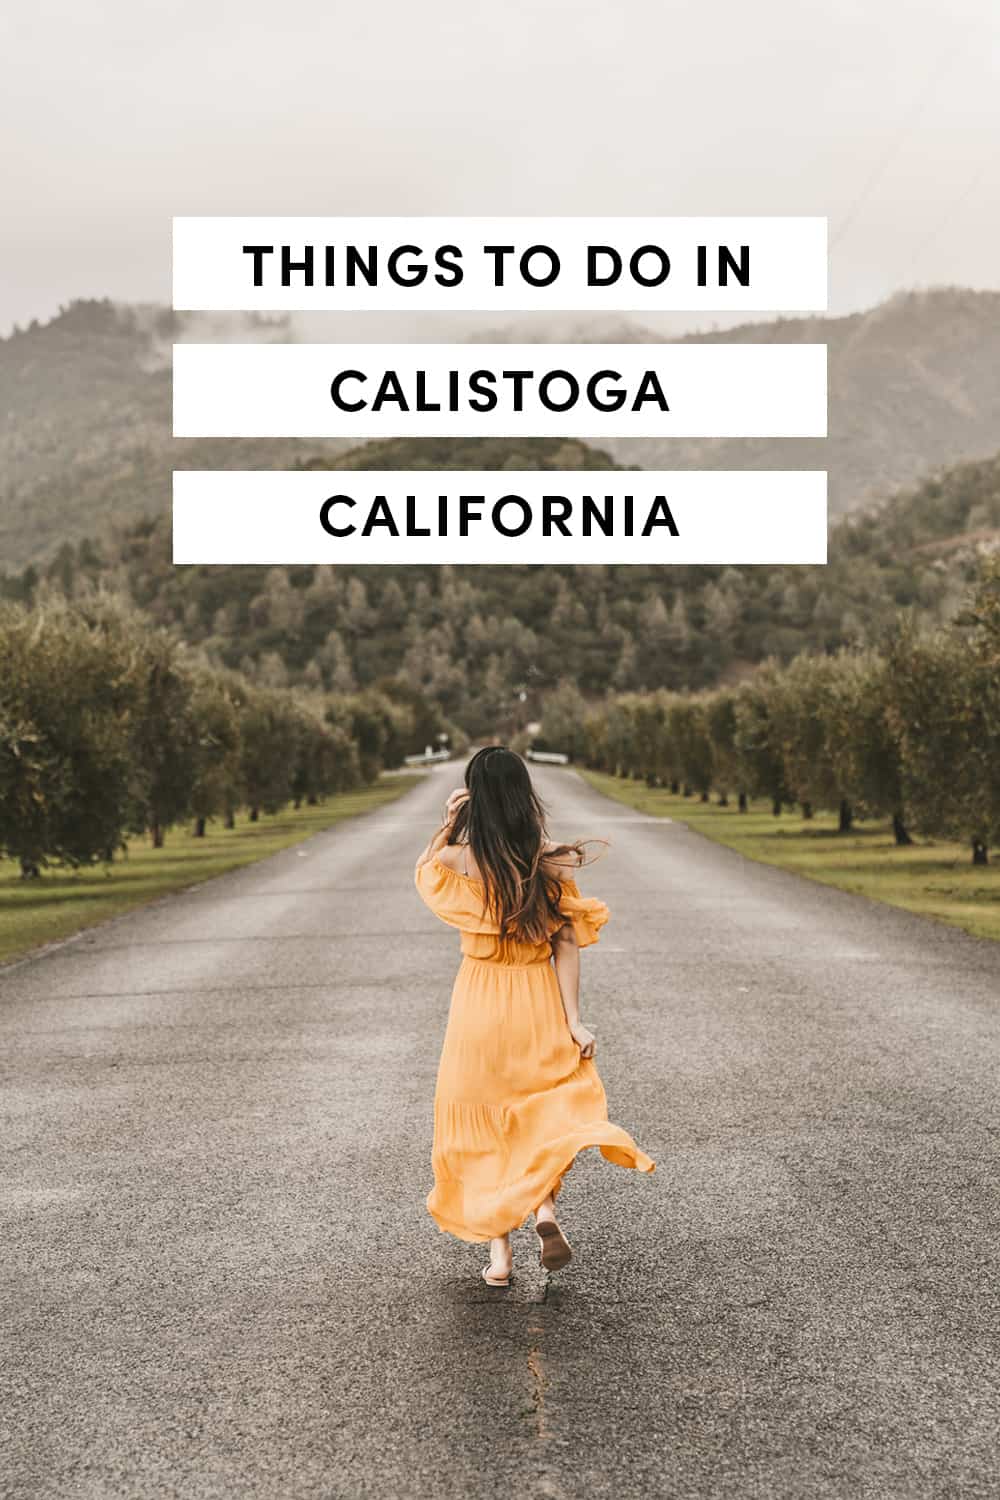 Things To Do In Calistoga California